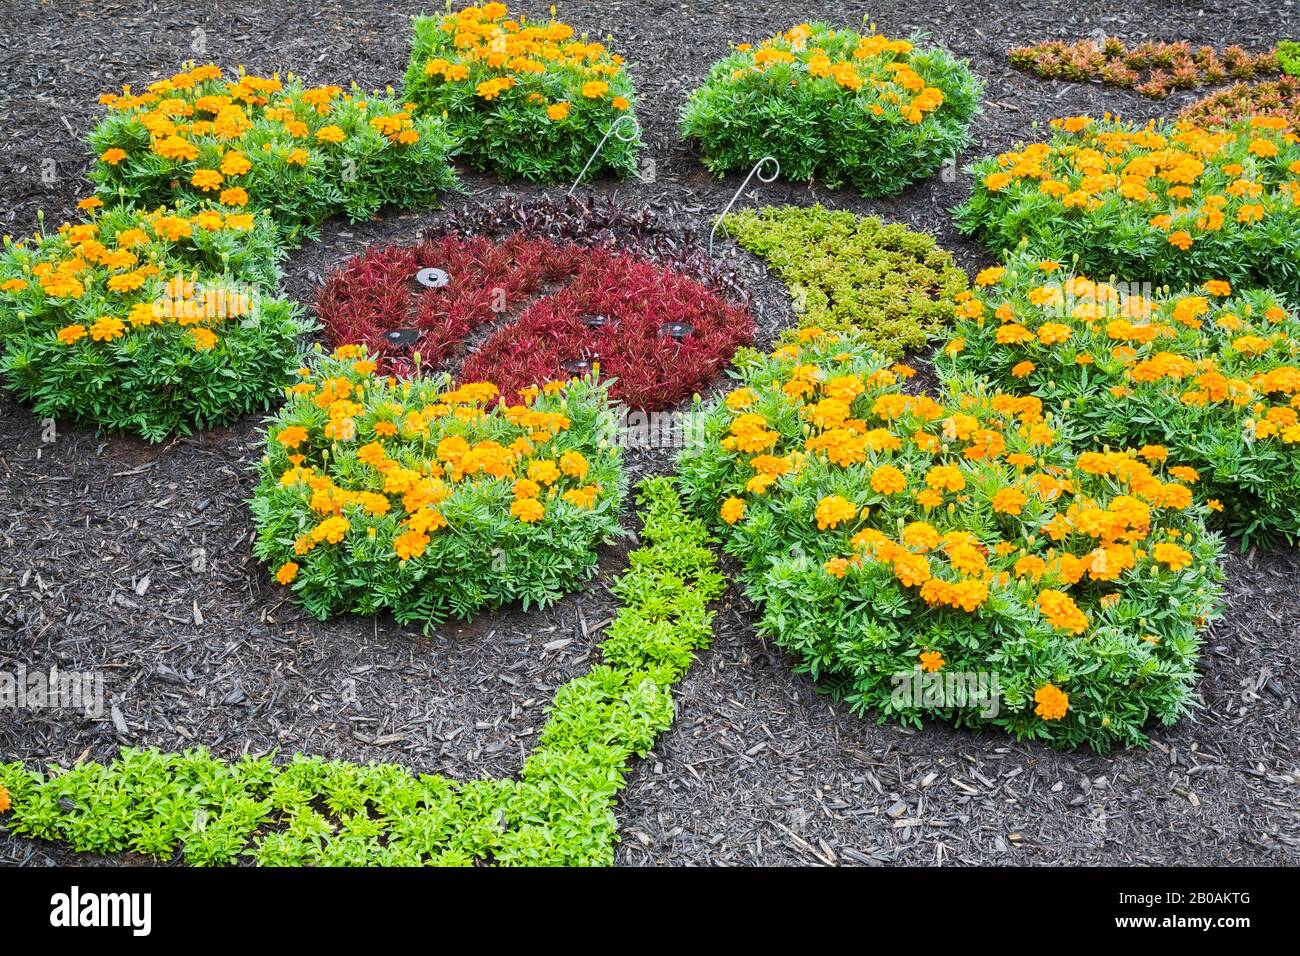 Ladybug sculpture designed with live maroon Alternanthera plants and surrounded by orange Tagetes - Marigold flowers in black mulch border in summer. Stock Photo